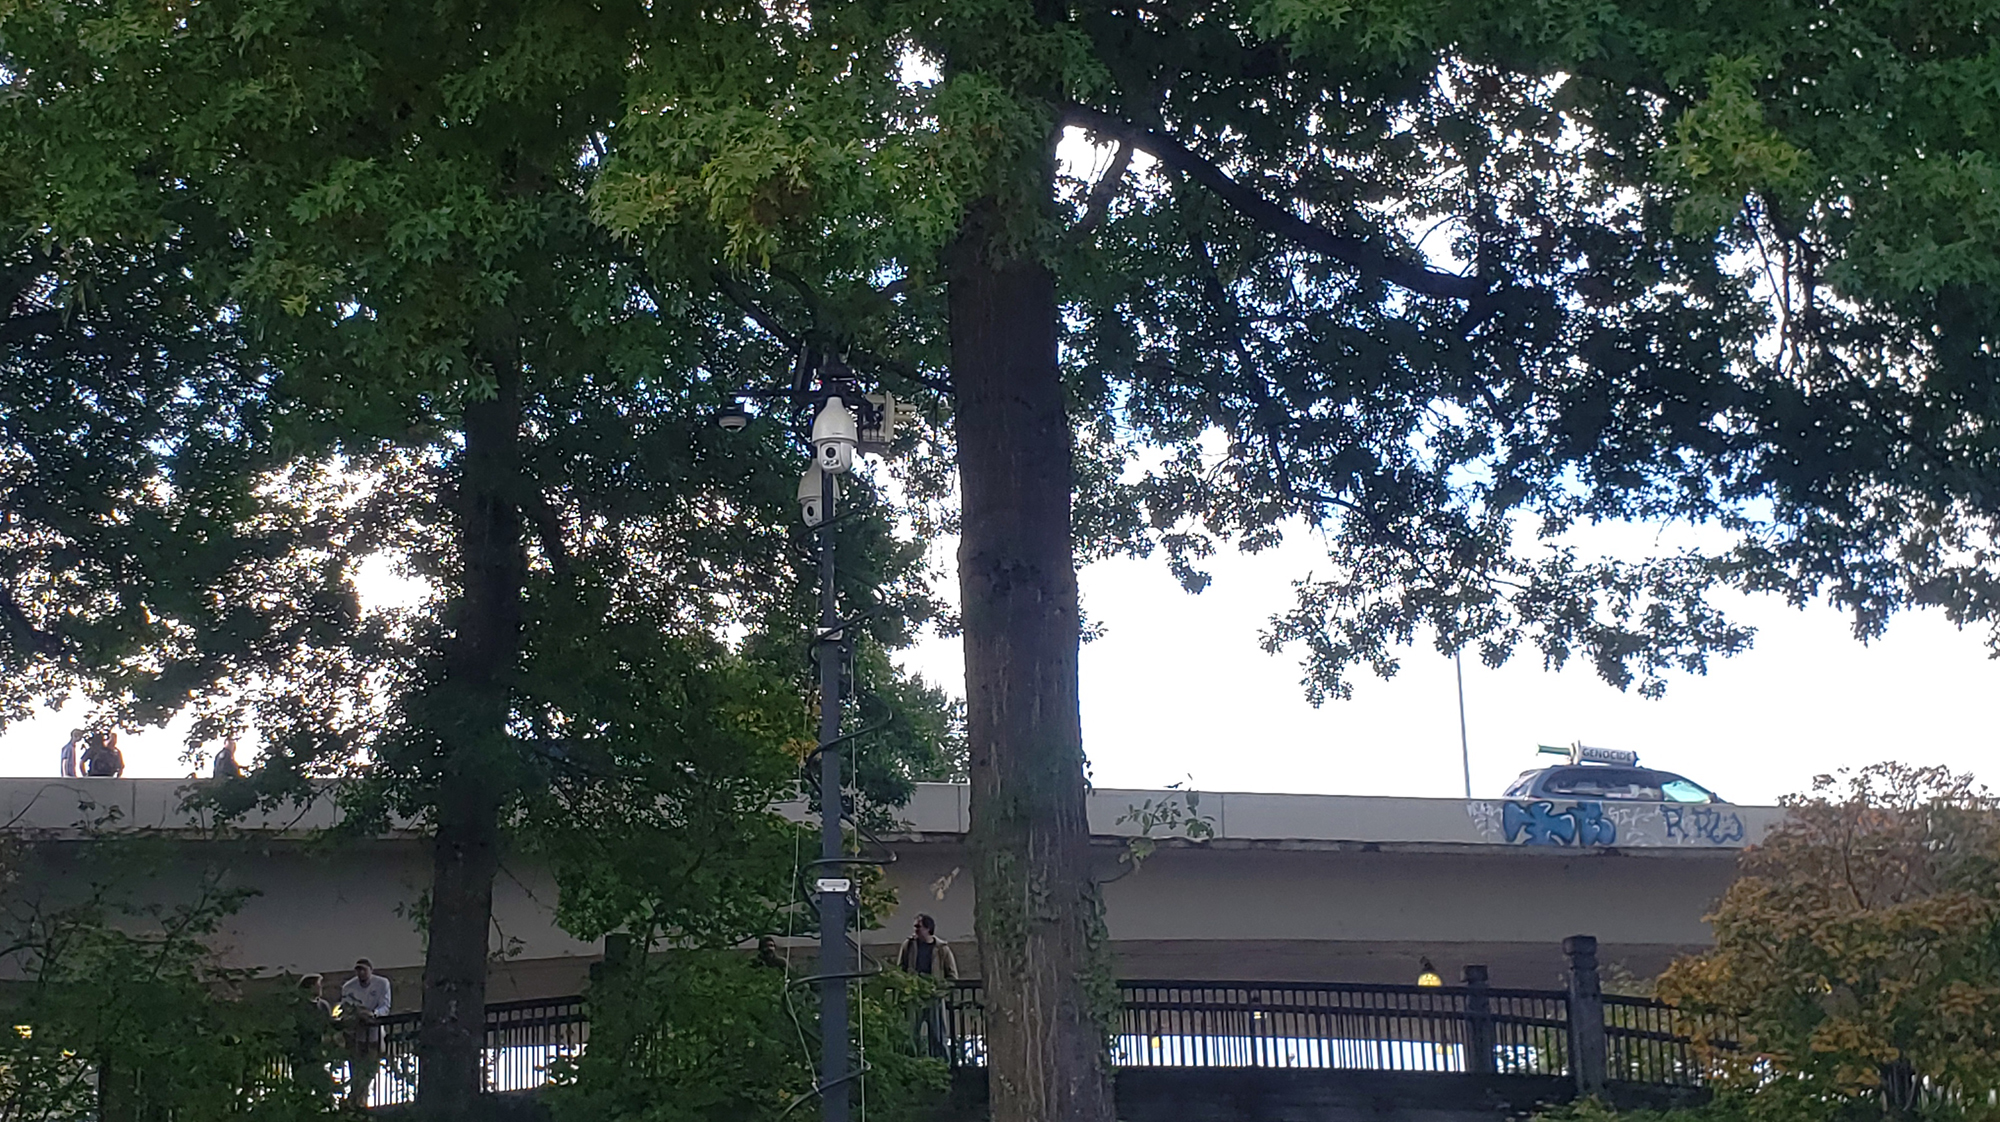 A color photo looking up towards an overpass past three tall, mature trees with green foliage. On the overpass, to the right, the top of a Chrysler Town & Country van can be seen with a large makeshift syringe on top. Two of the trees and the EPD Guardian tower can be seen in the middle. To the left, in a break of the foliage, are three individuals on the overpass talking.